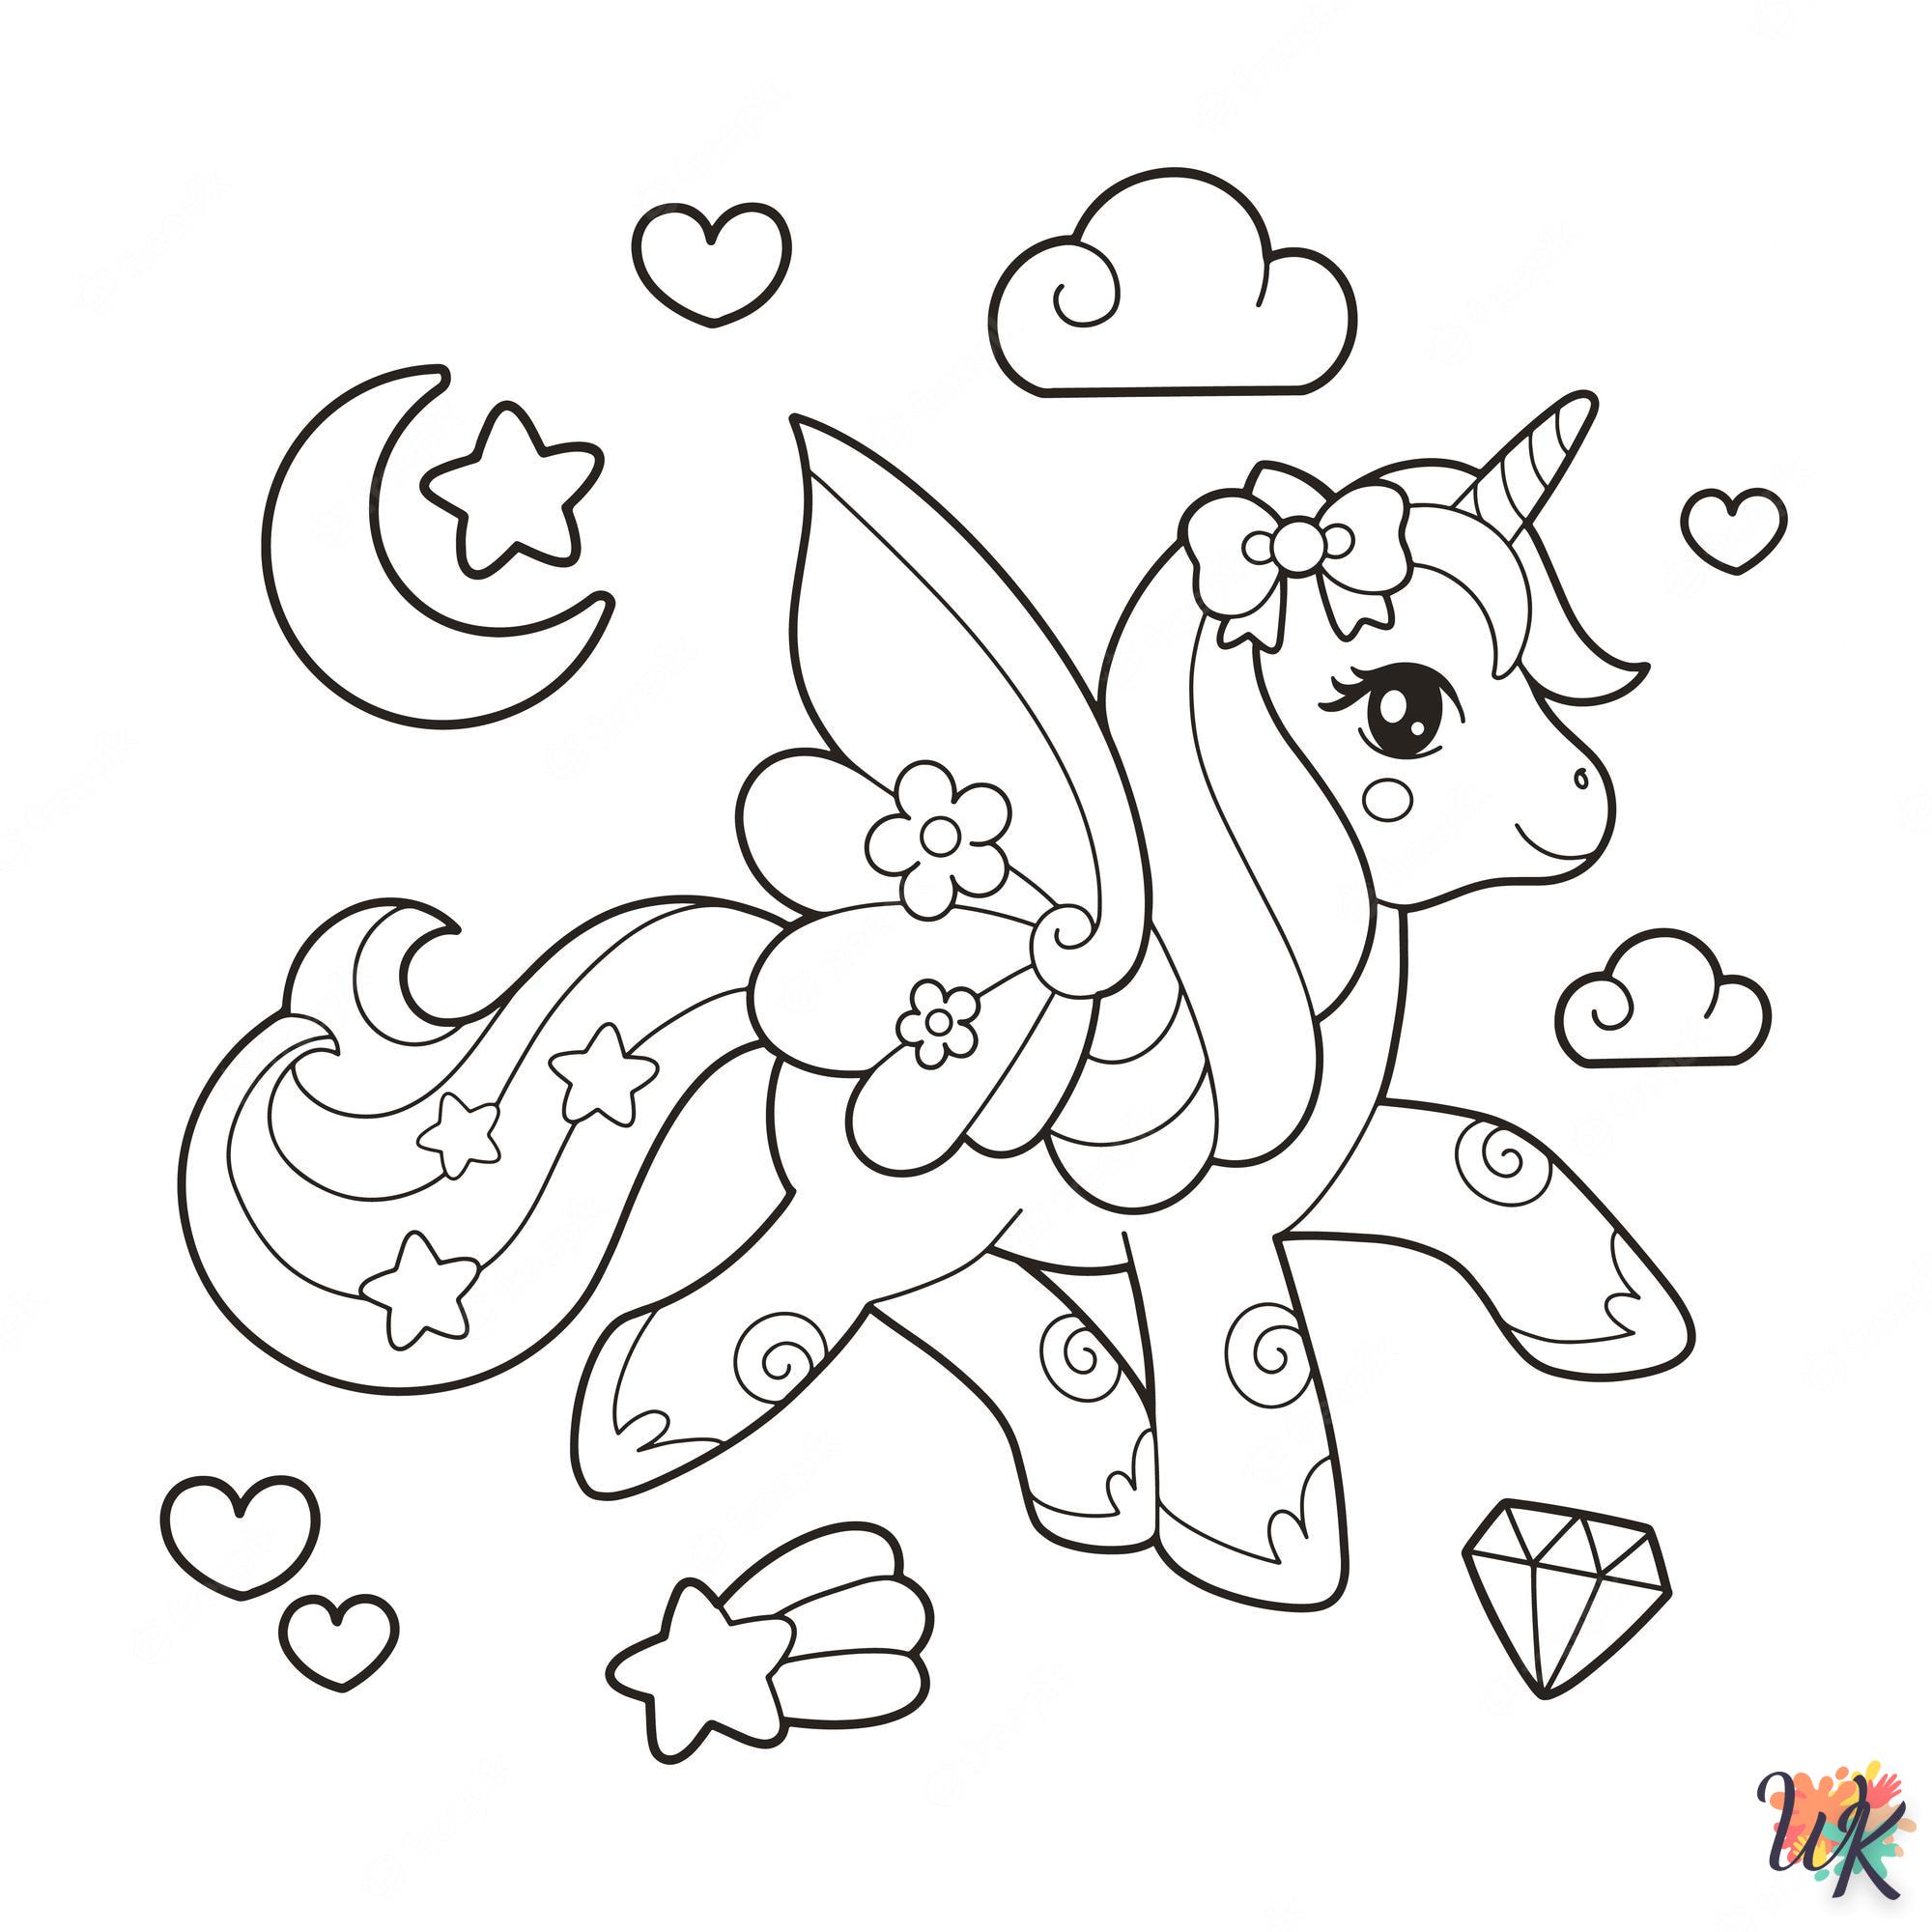 Unicorn free coloring pages